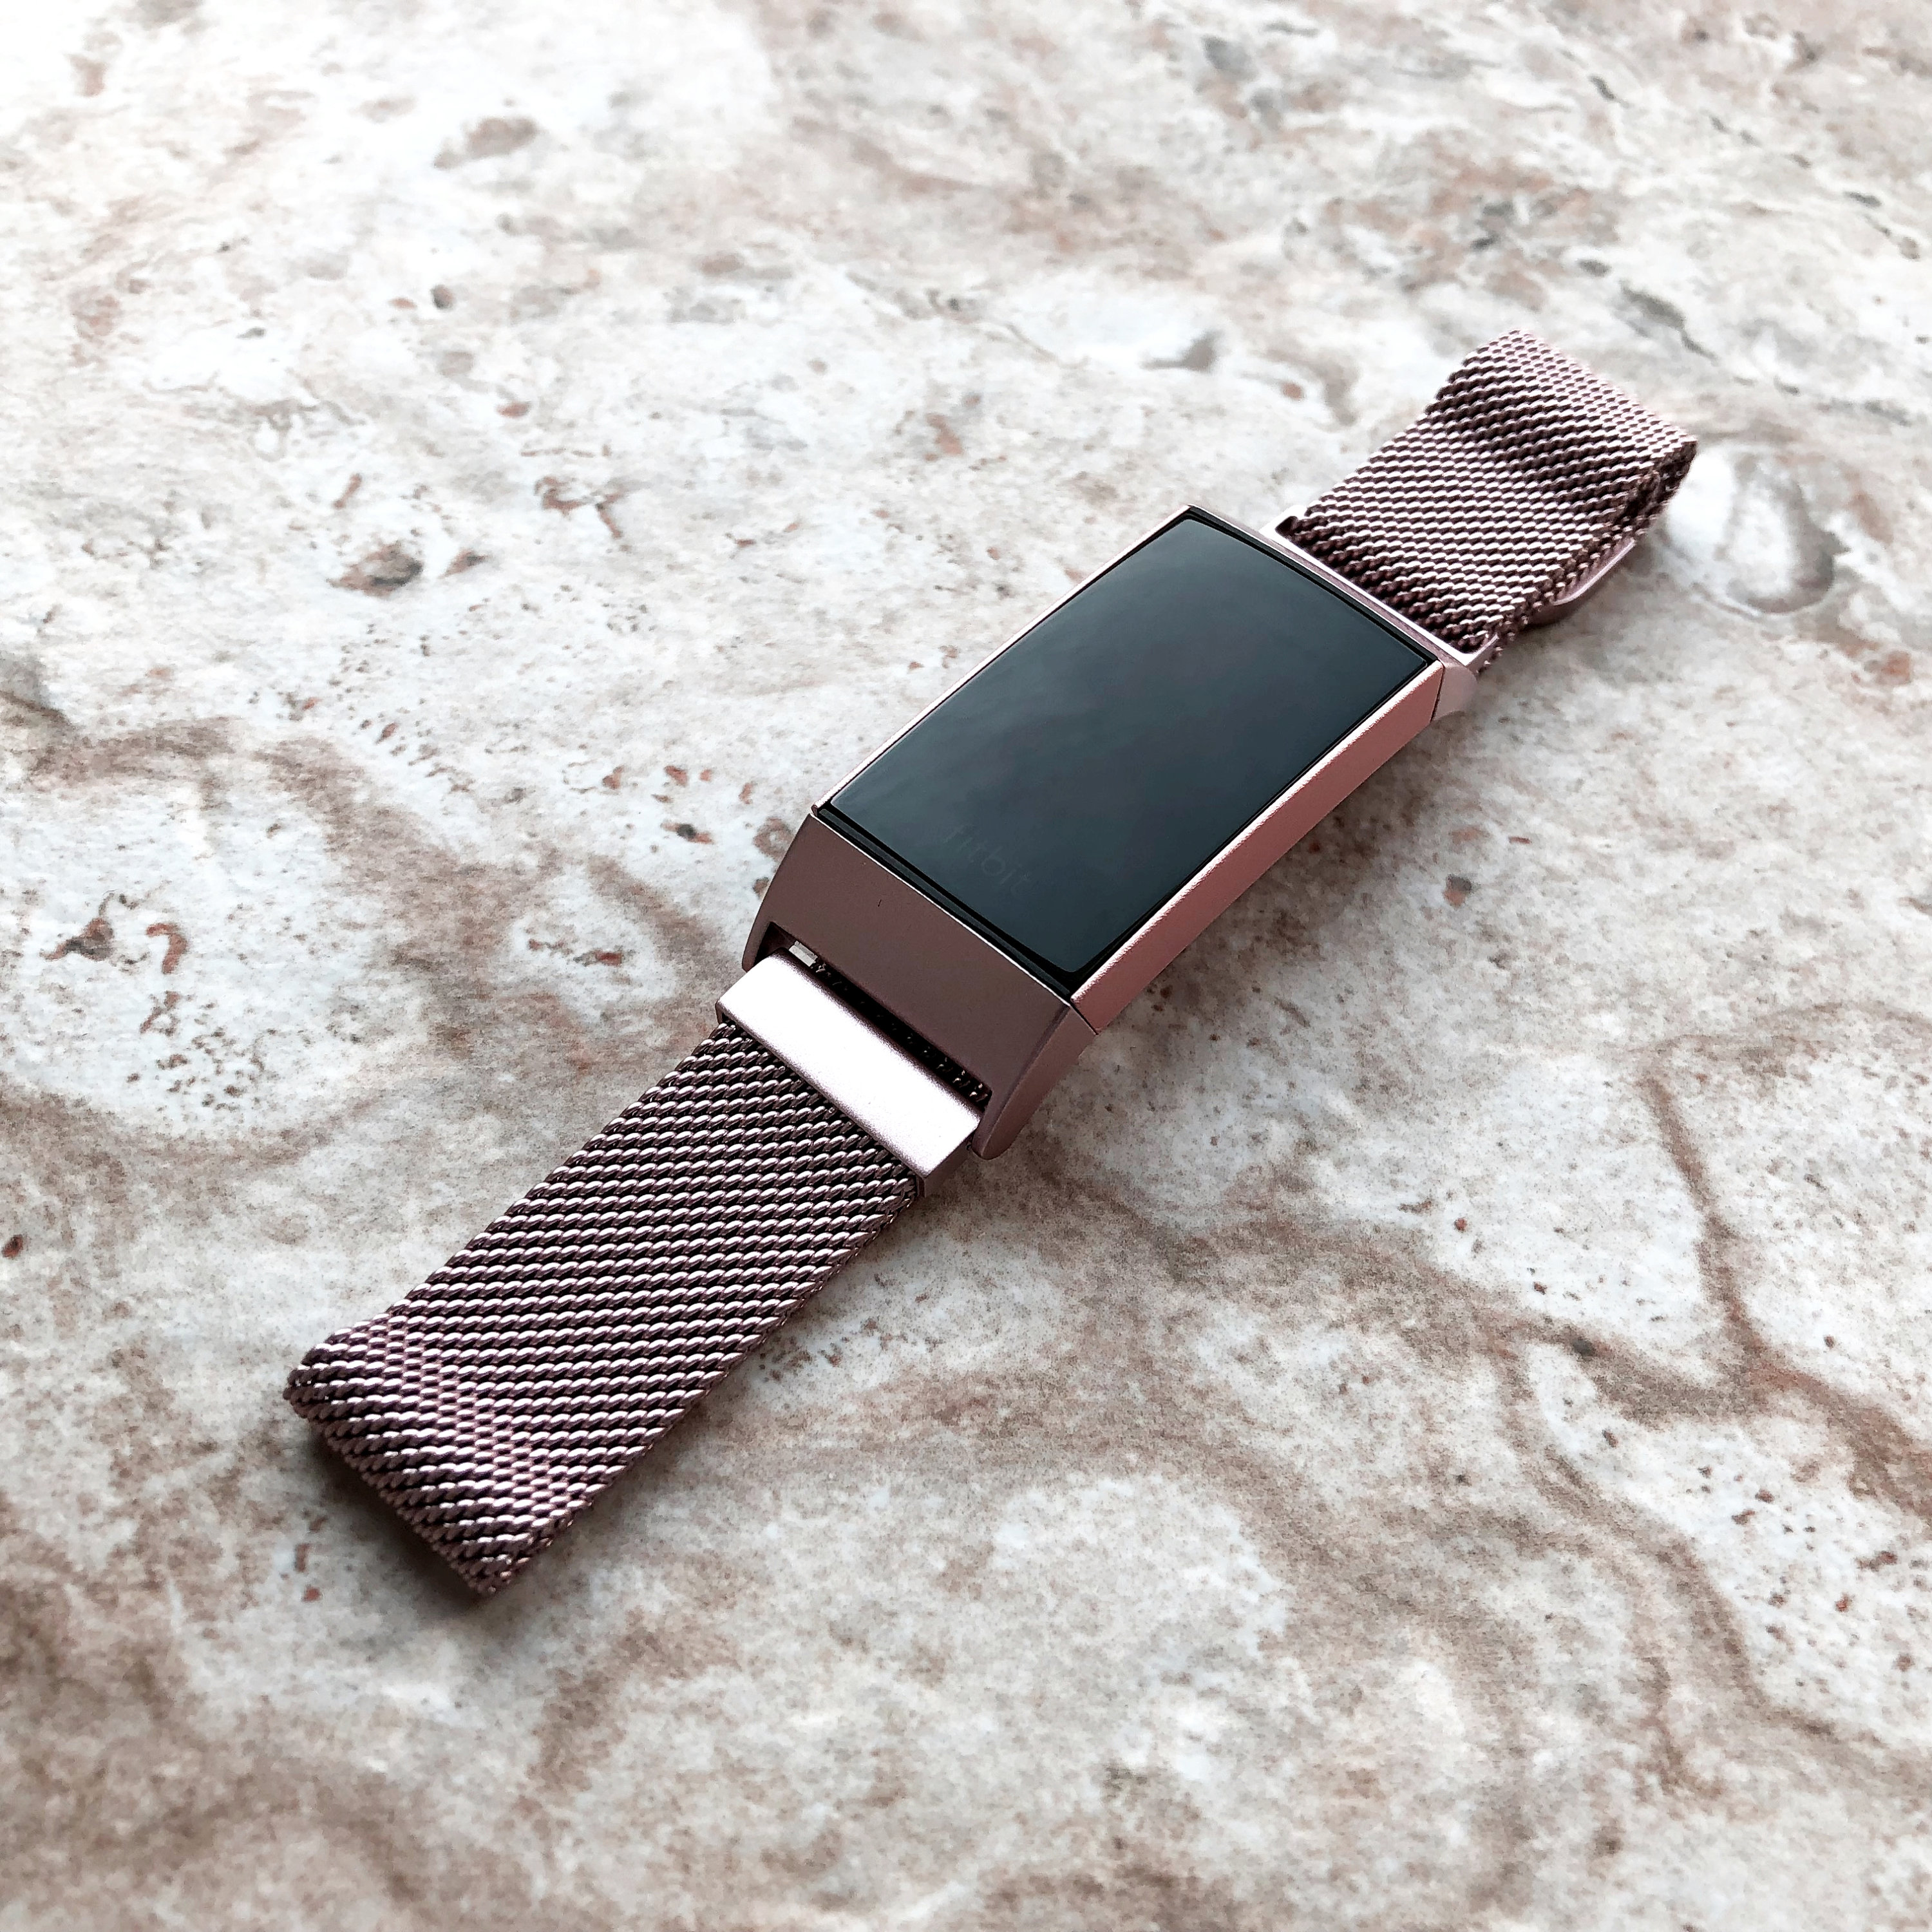 fitbit charge 3 milanese band